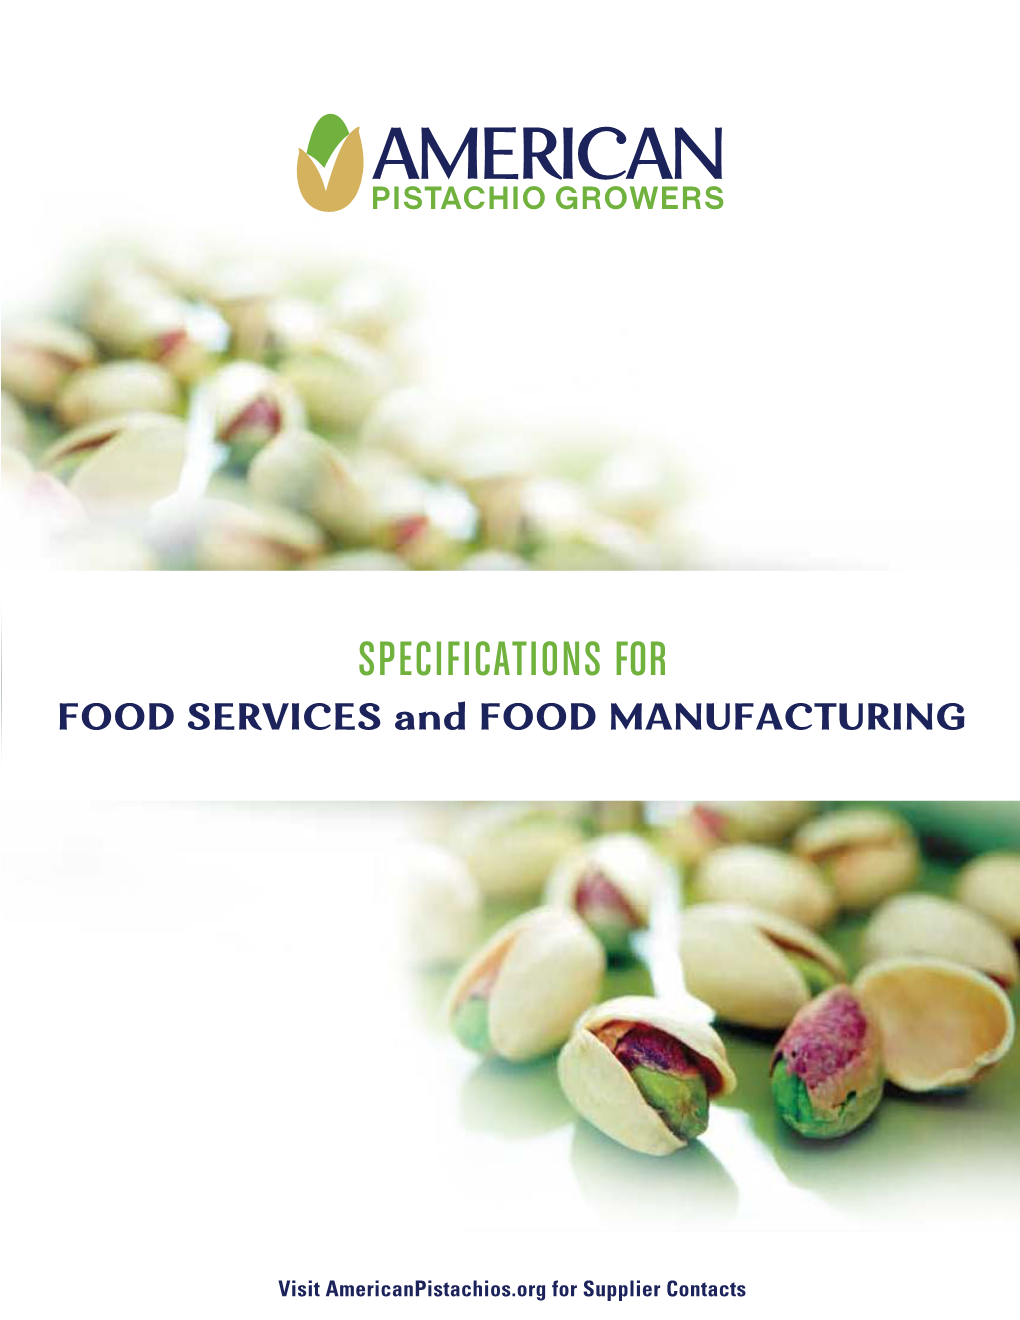 SPECIFICATIONS for FOOD SERVICES and FOOD MANUFACTURING